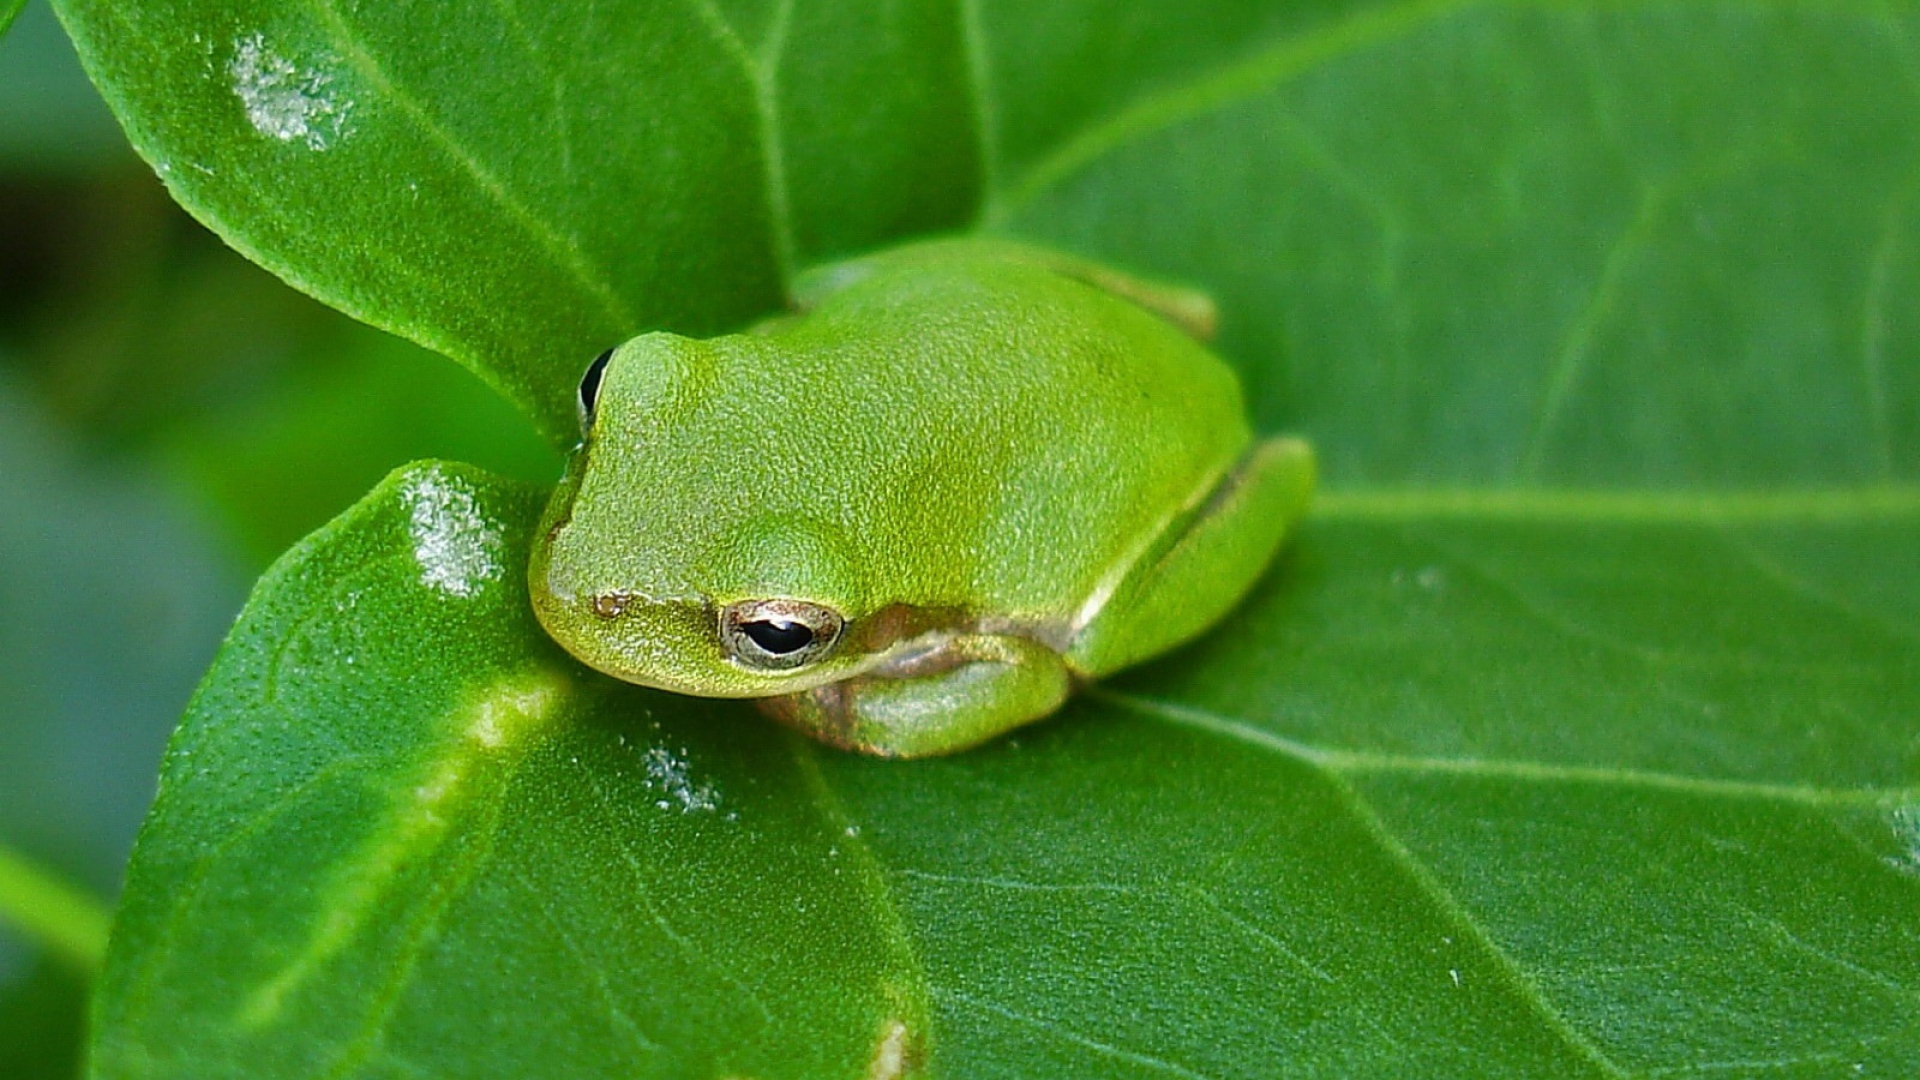 Download Wallpaper 1920x1080 frog, leaf, surface, reptile Full HD ...